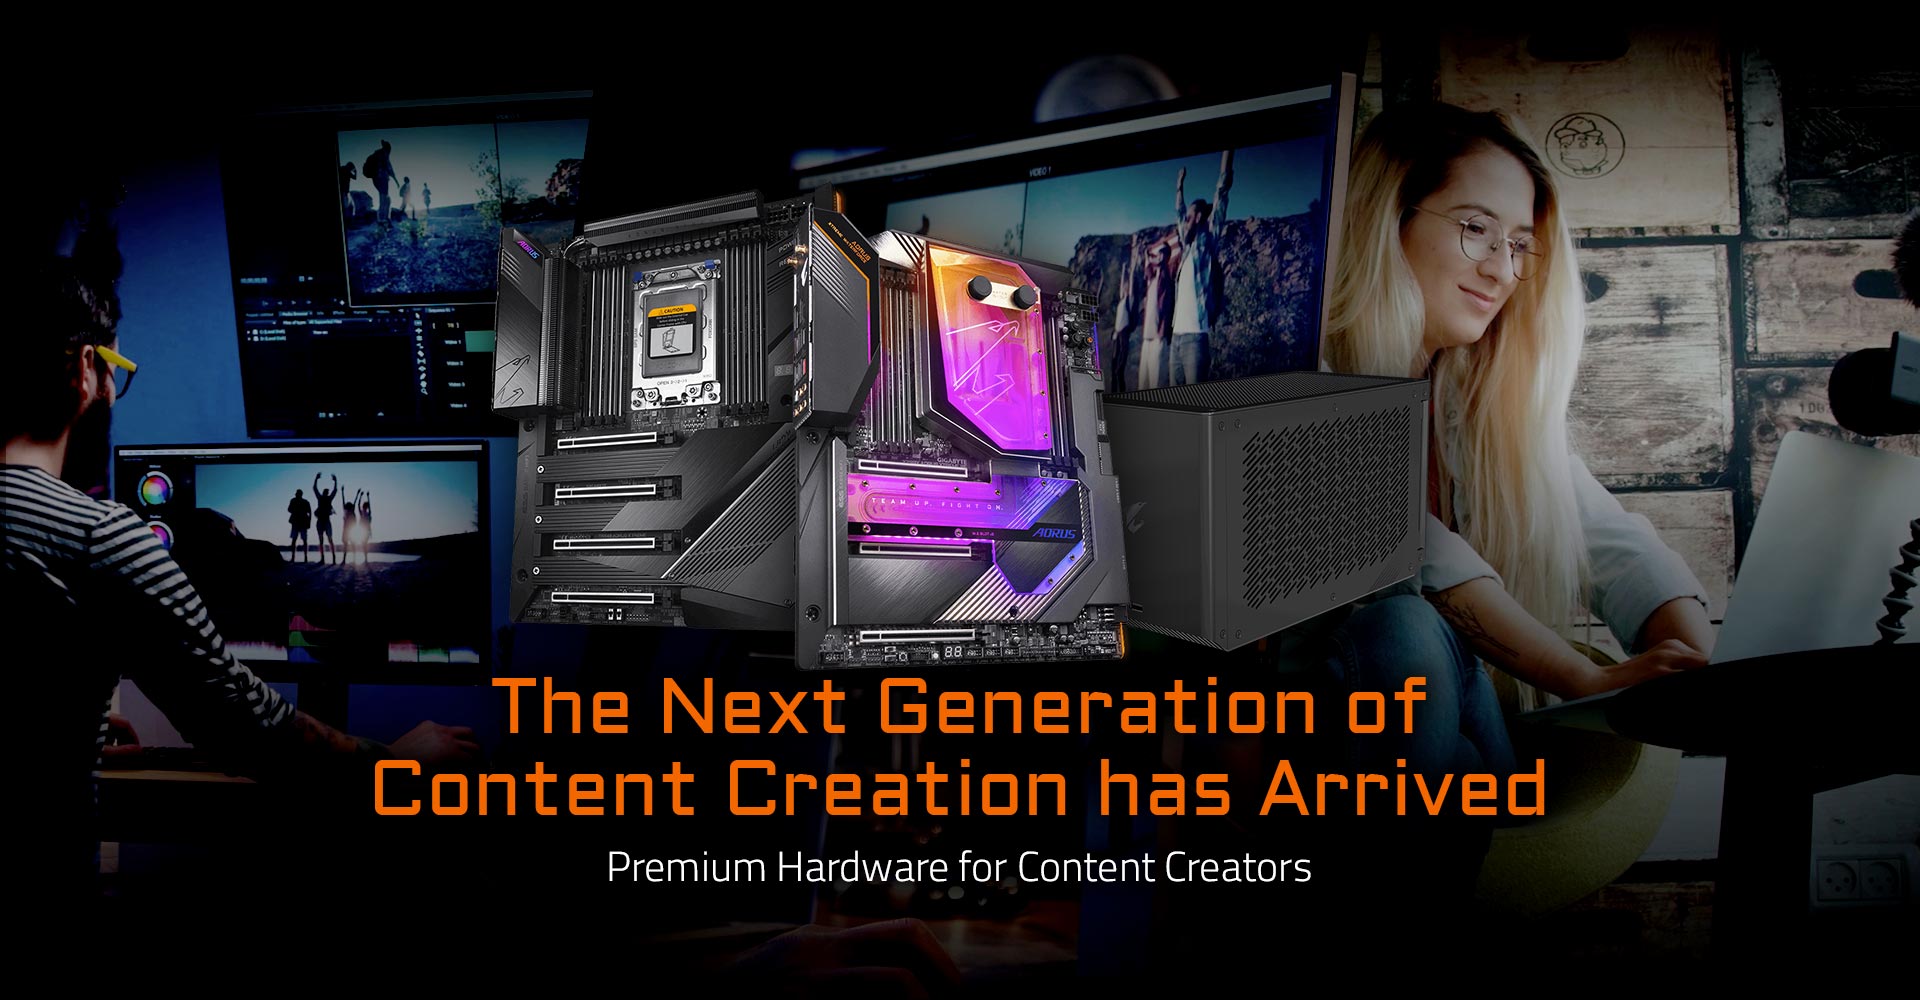 GIGABYTE Offers Top-of-the-line Hardware for Content Creators